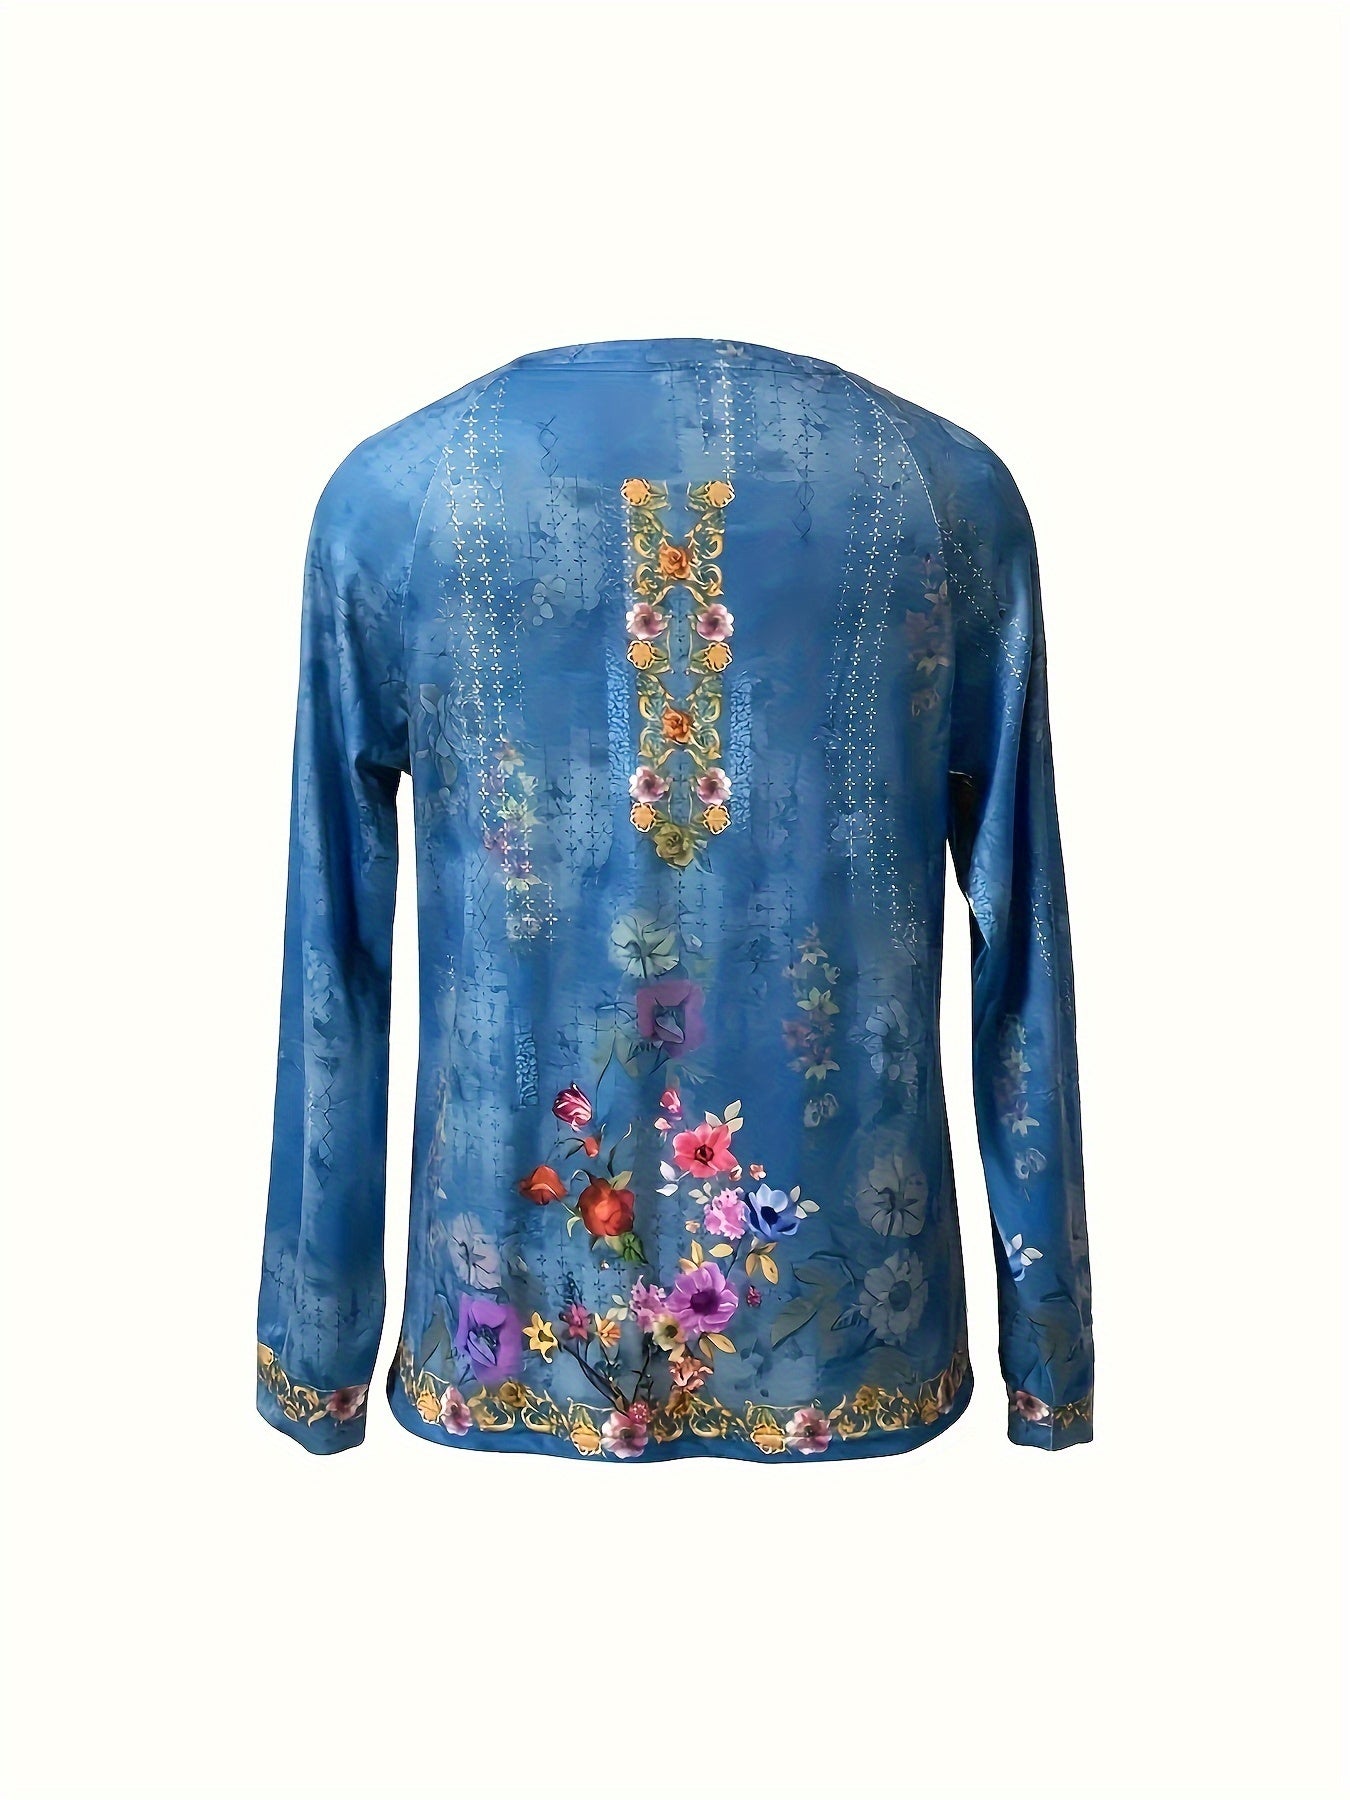 Floral Print Crew Neck T-shirt, Casual Long Sleeve Top For Spring & Fall, Women's Clothing